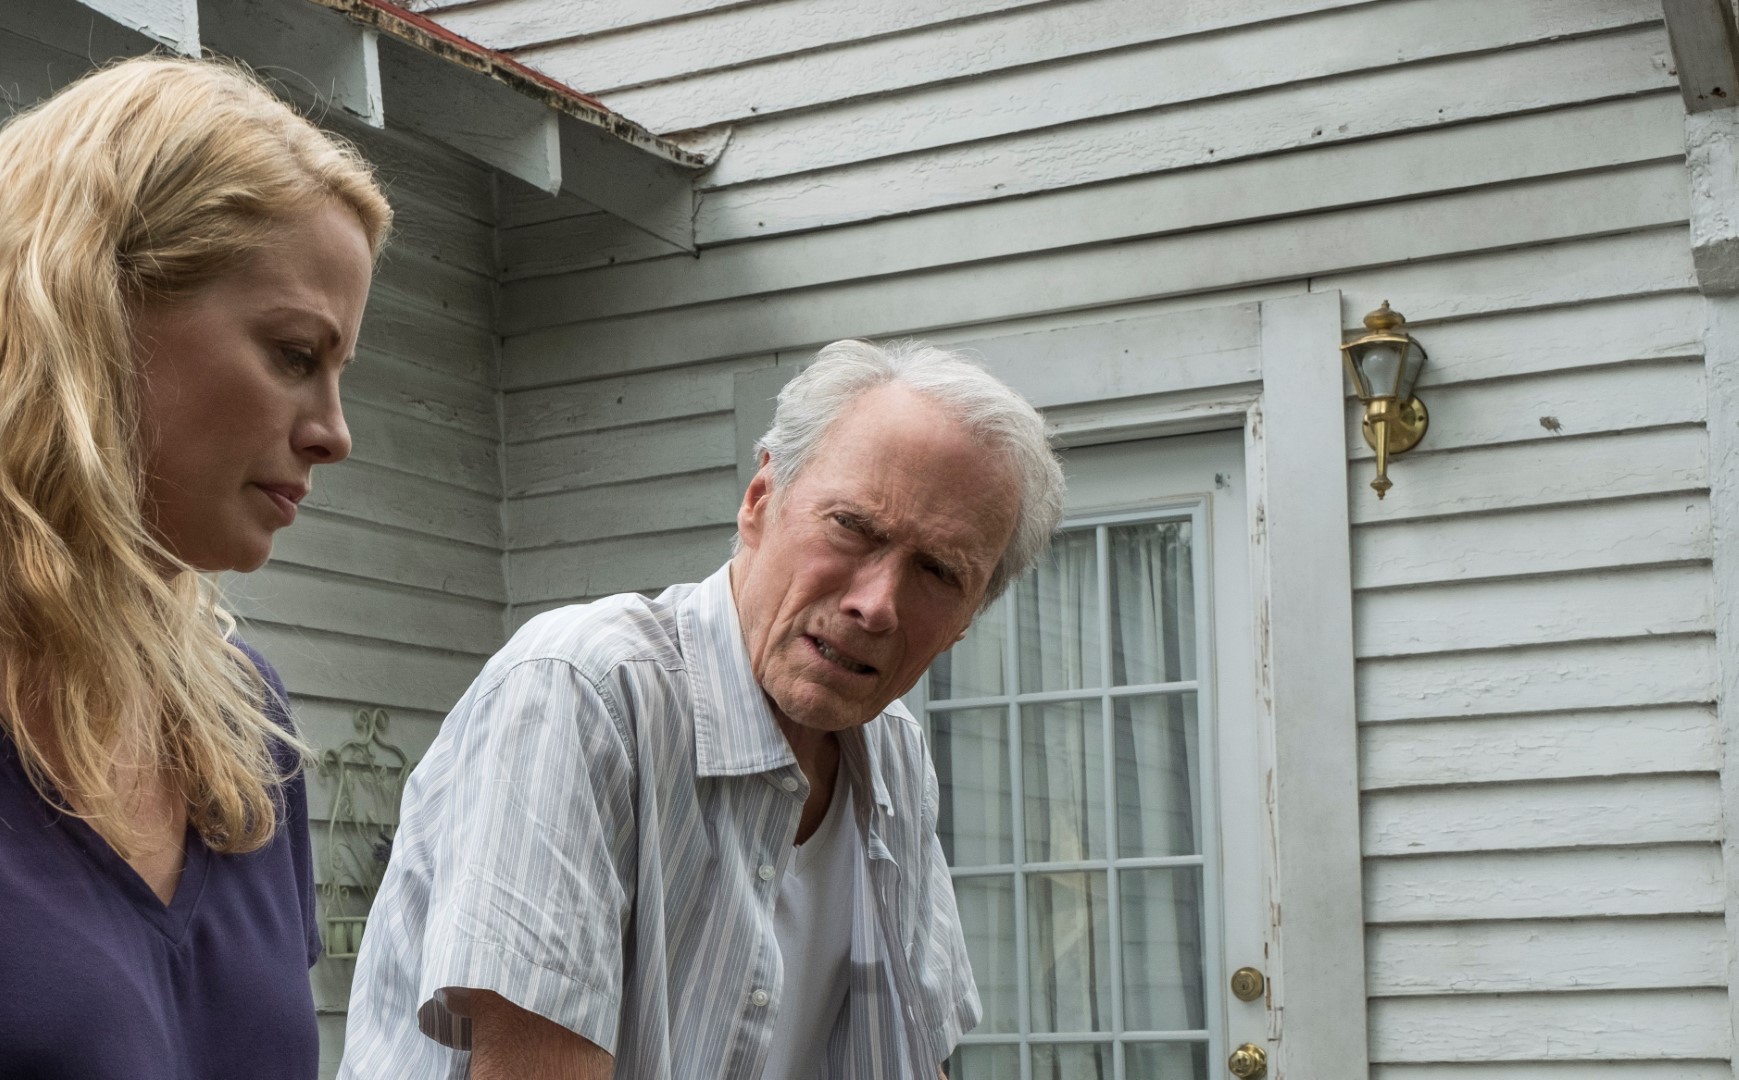 Review – The Mule (2019)